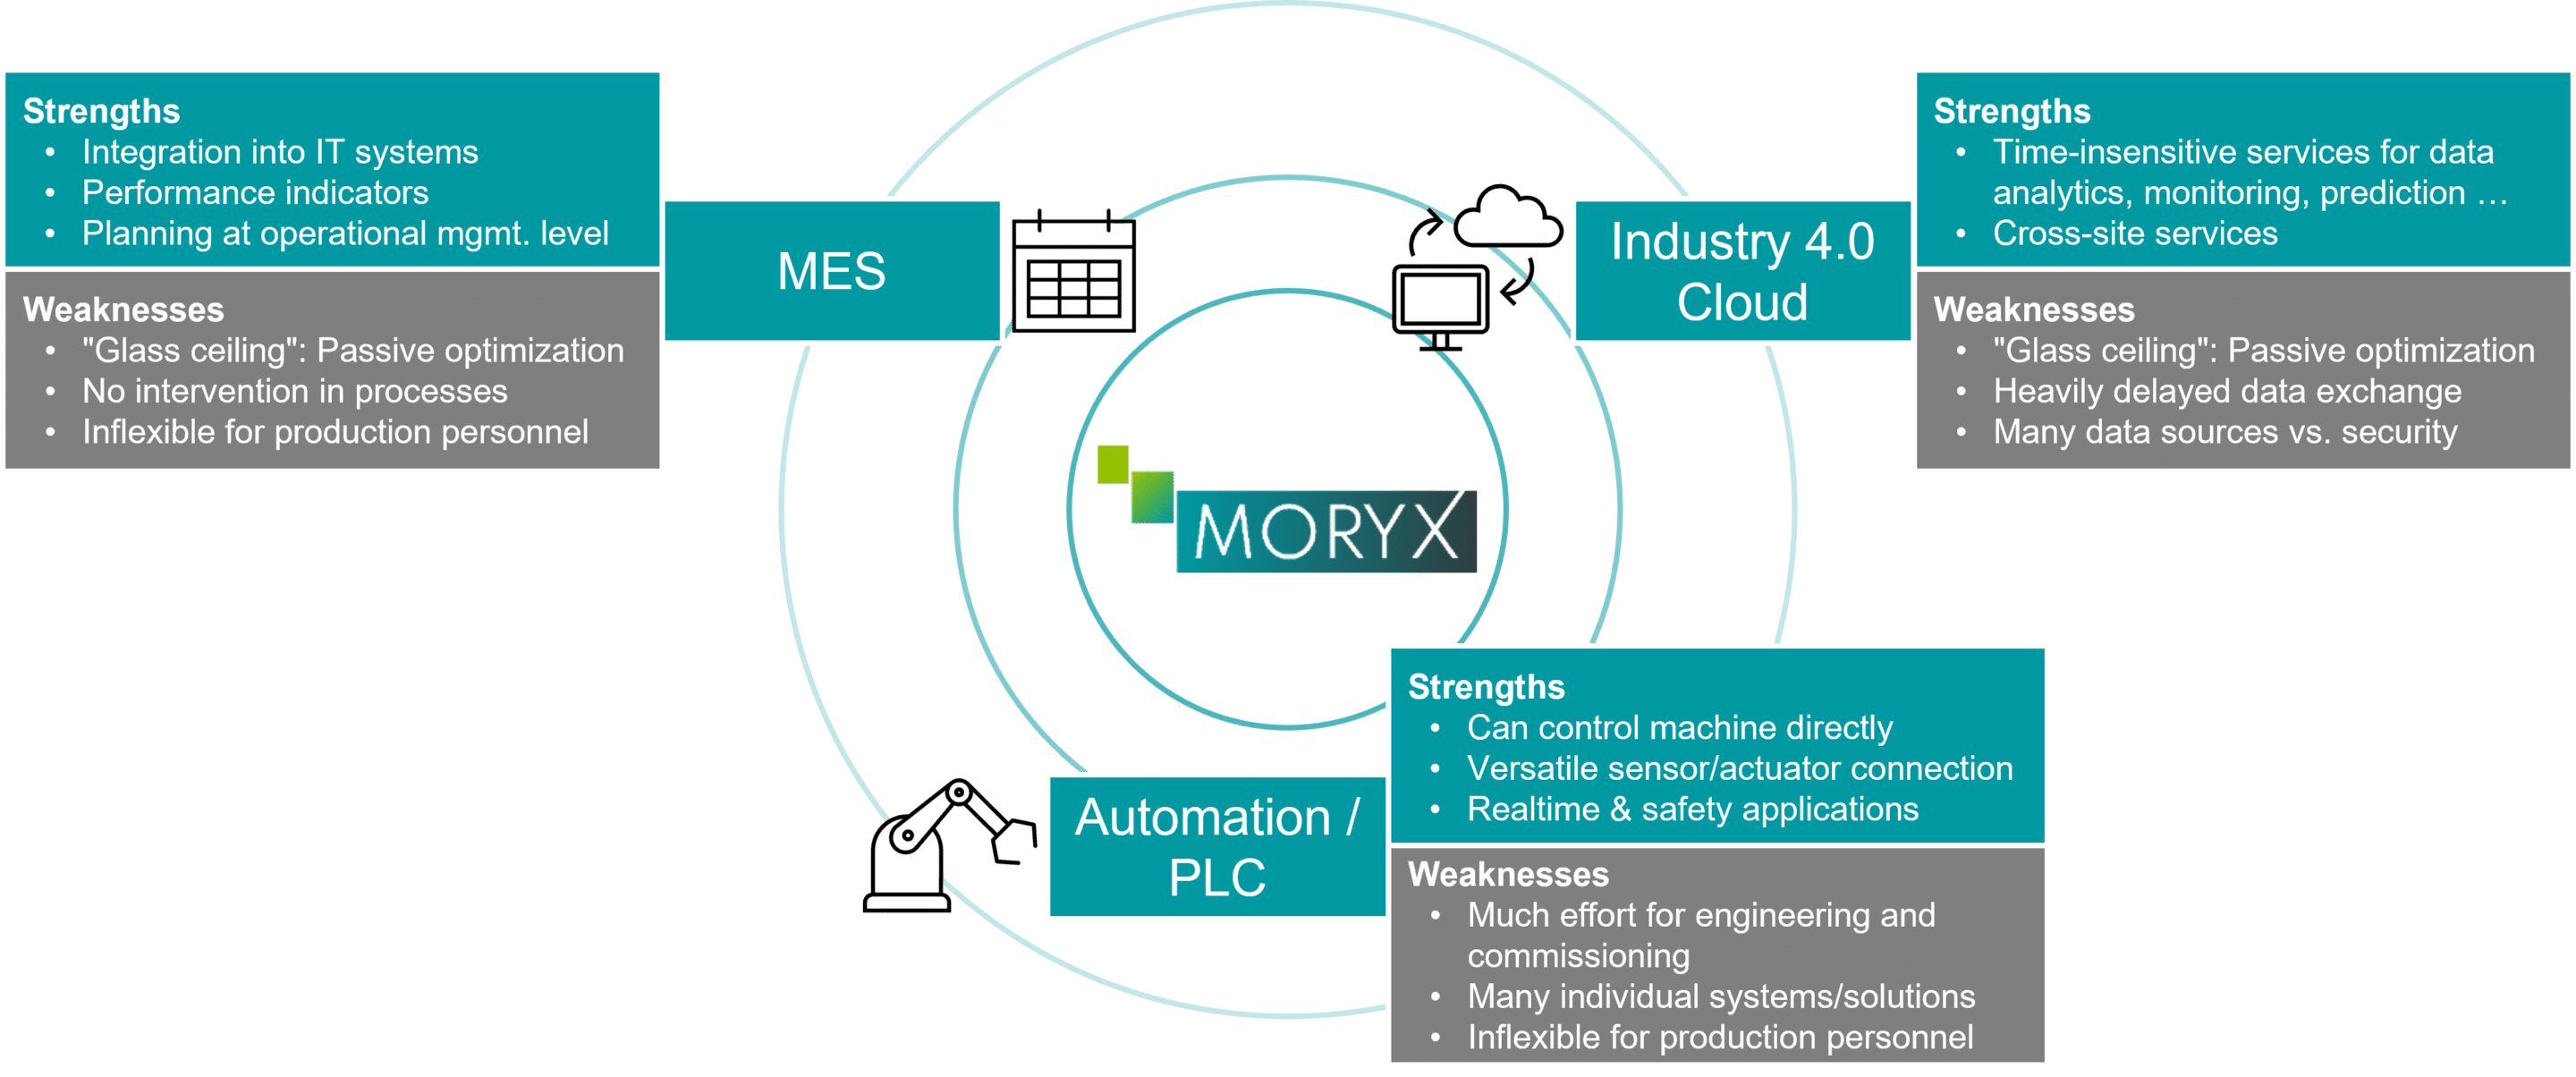 MORYX integrates strengths and solves weaknesses of other systems